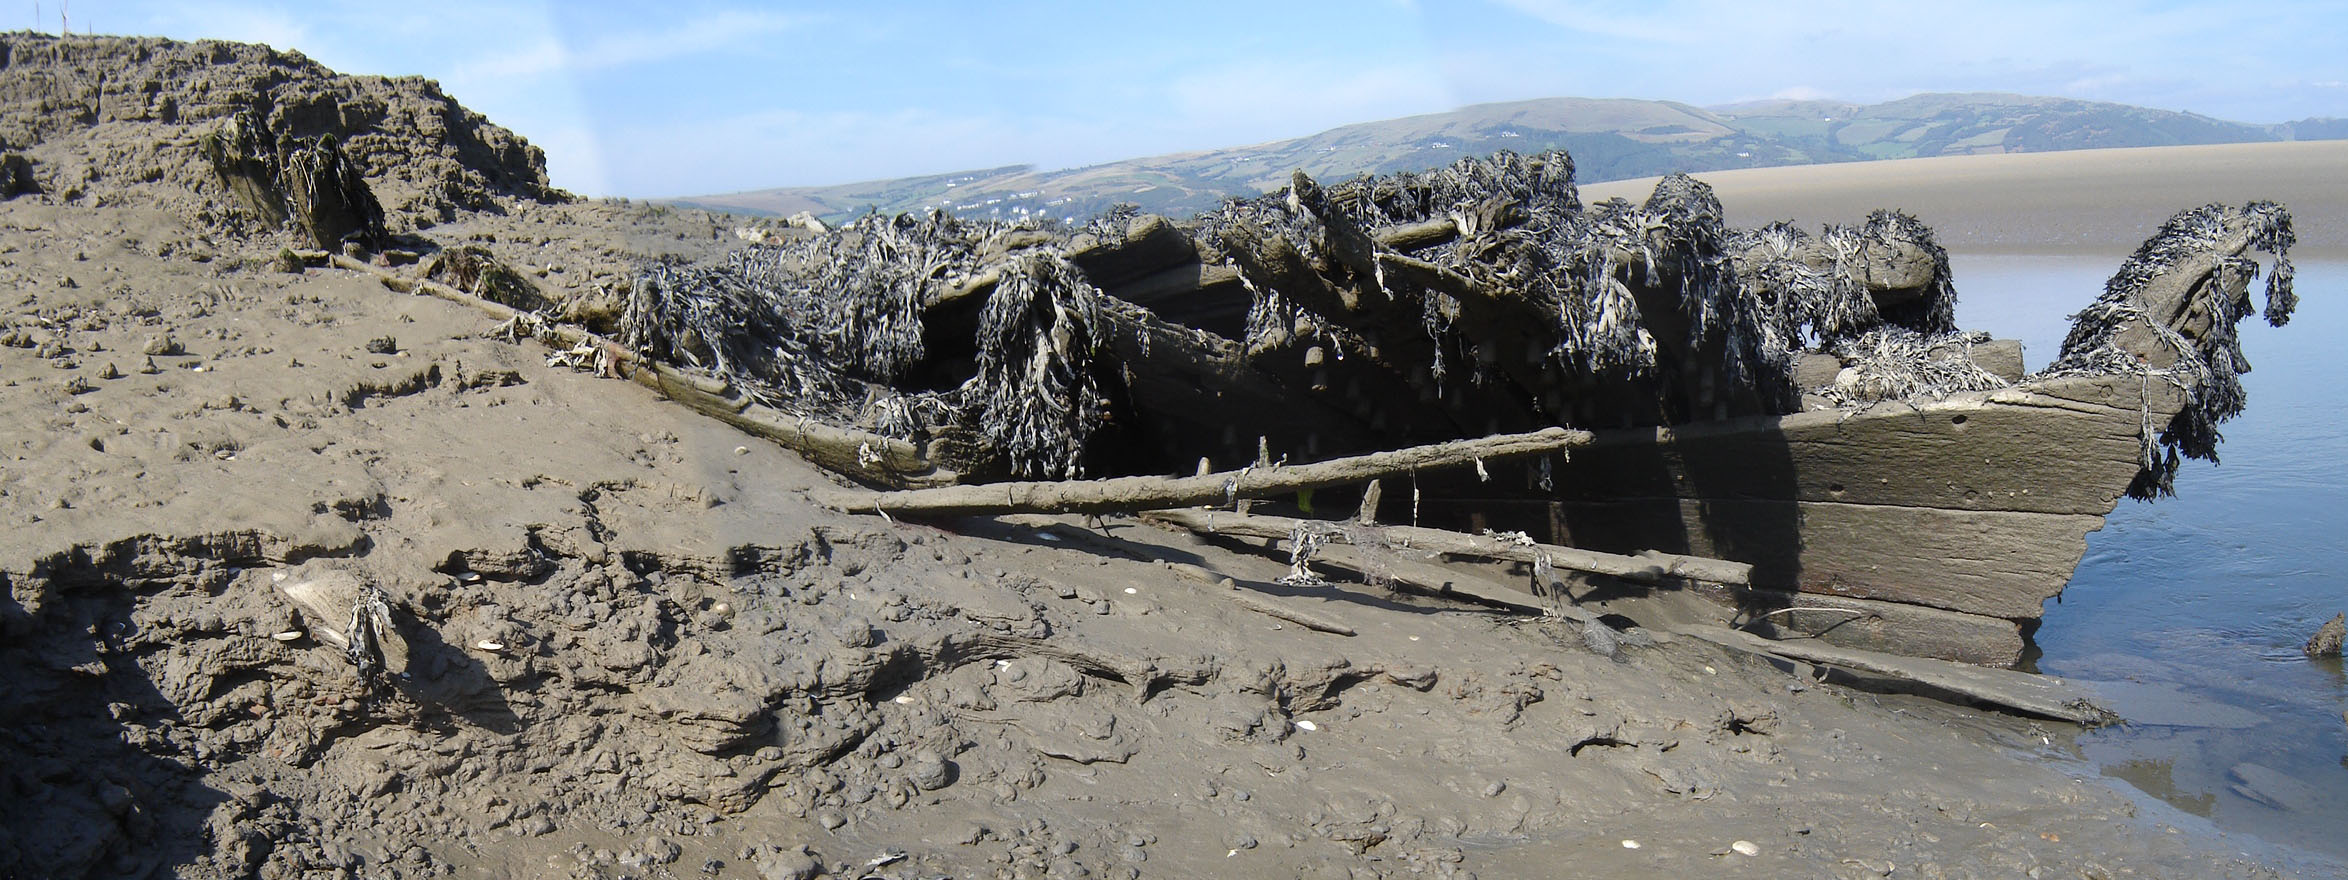  The remains of the wreck emerging from the bank of the Afon Leri at Ynyslas